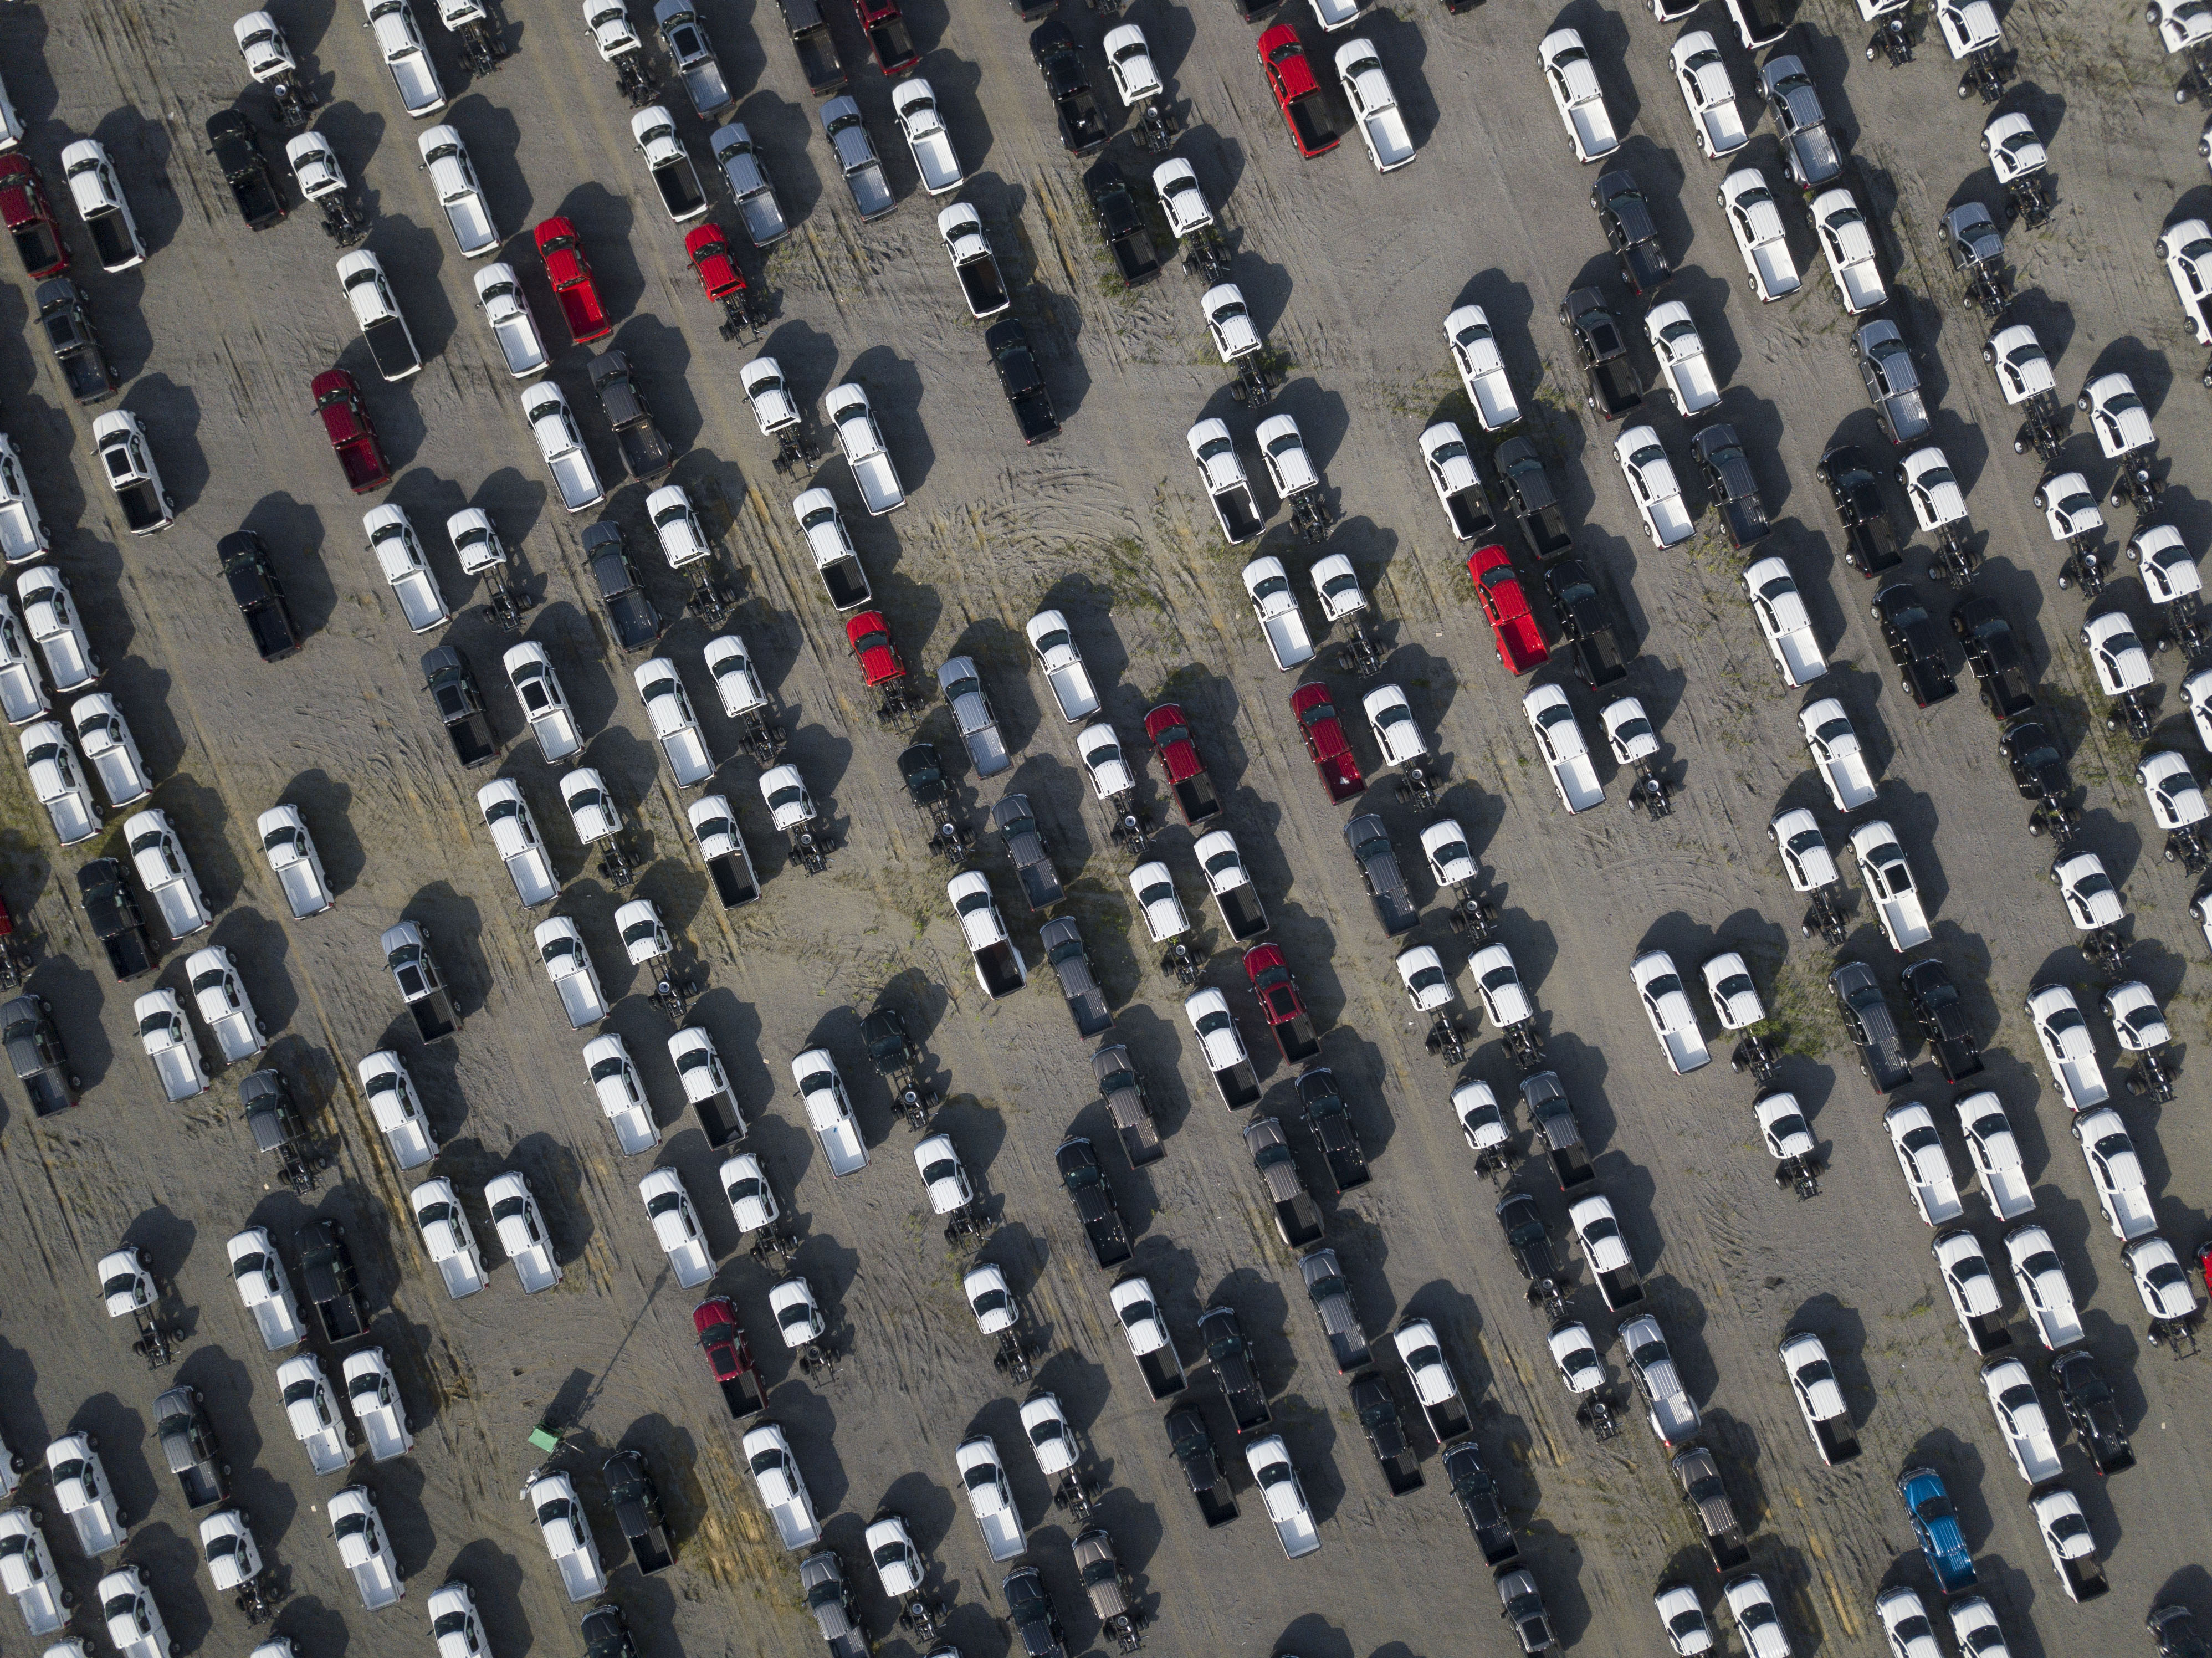 A parking lot with rows of new trucks, seen from high above.